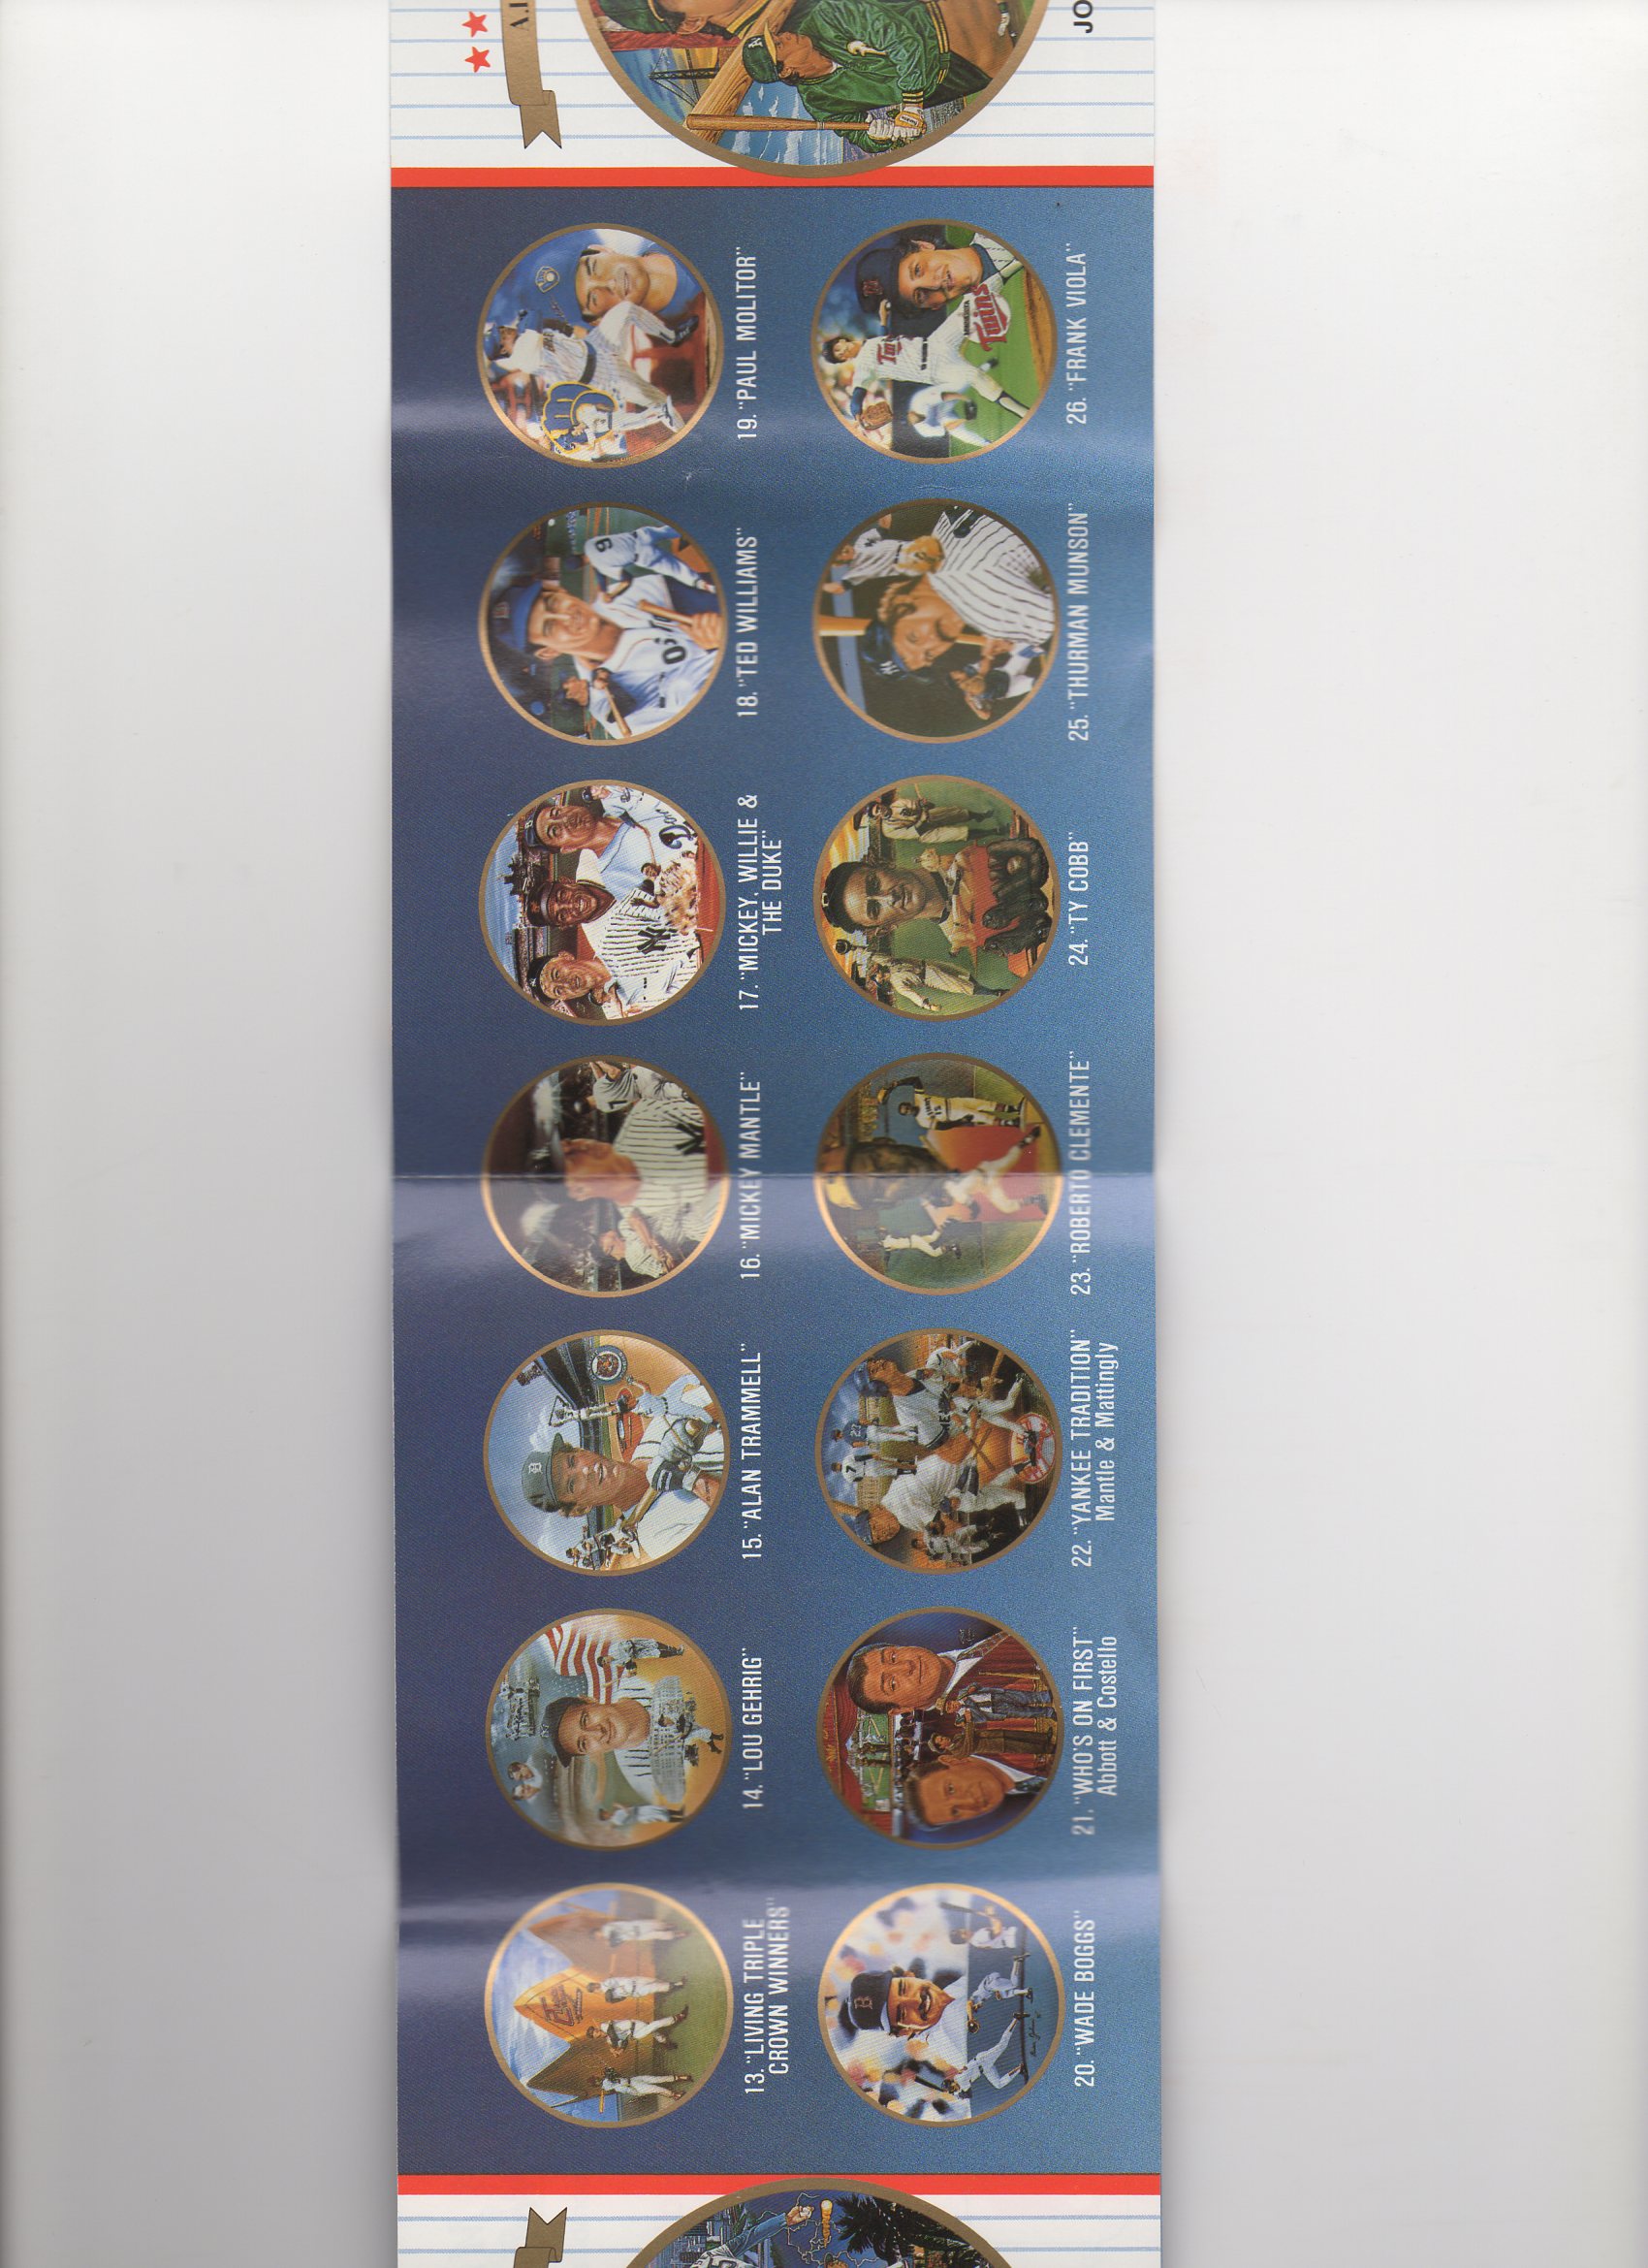 1989 sports impressions 10 page foldout brochure